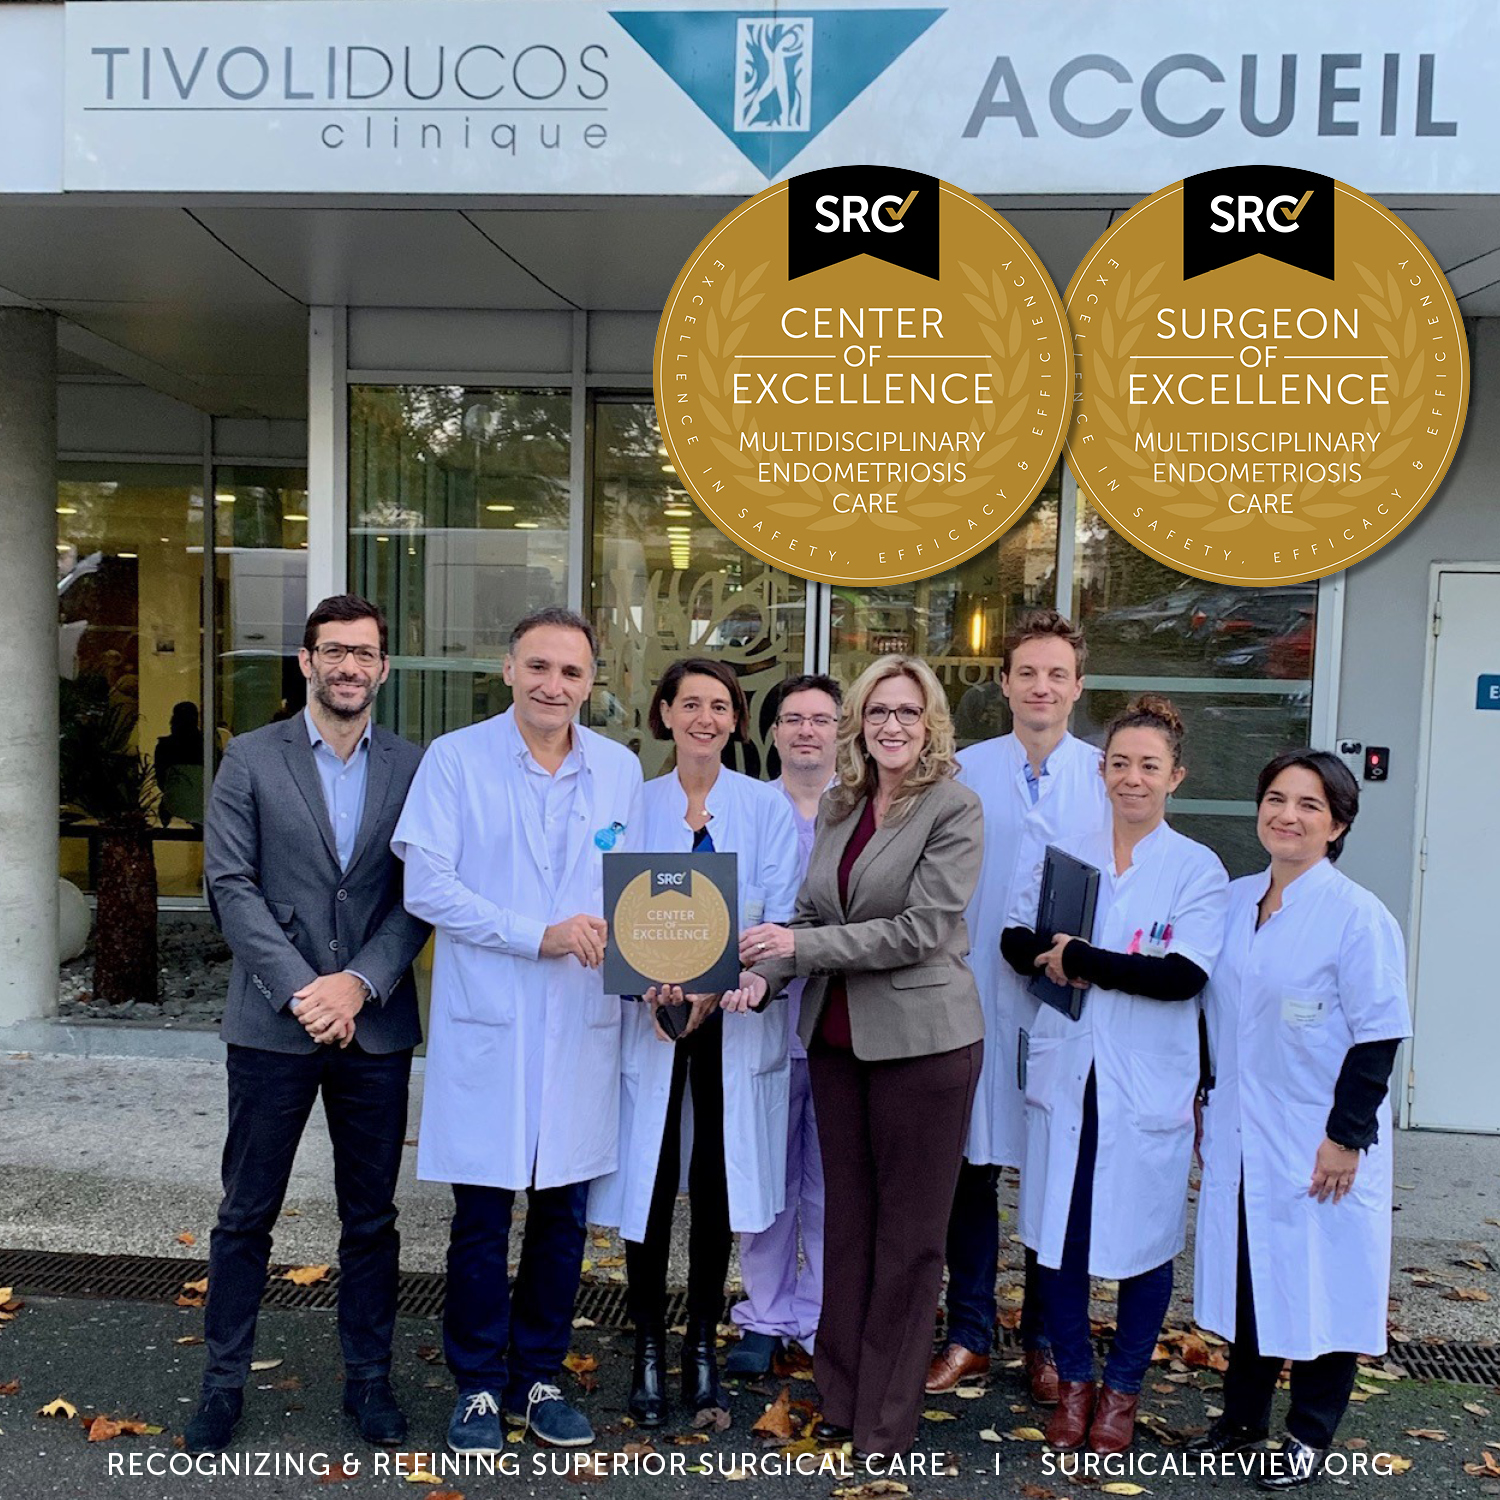 Clinique Tivoli-Ducos in Bordeaux, France is now SRC accredited